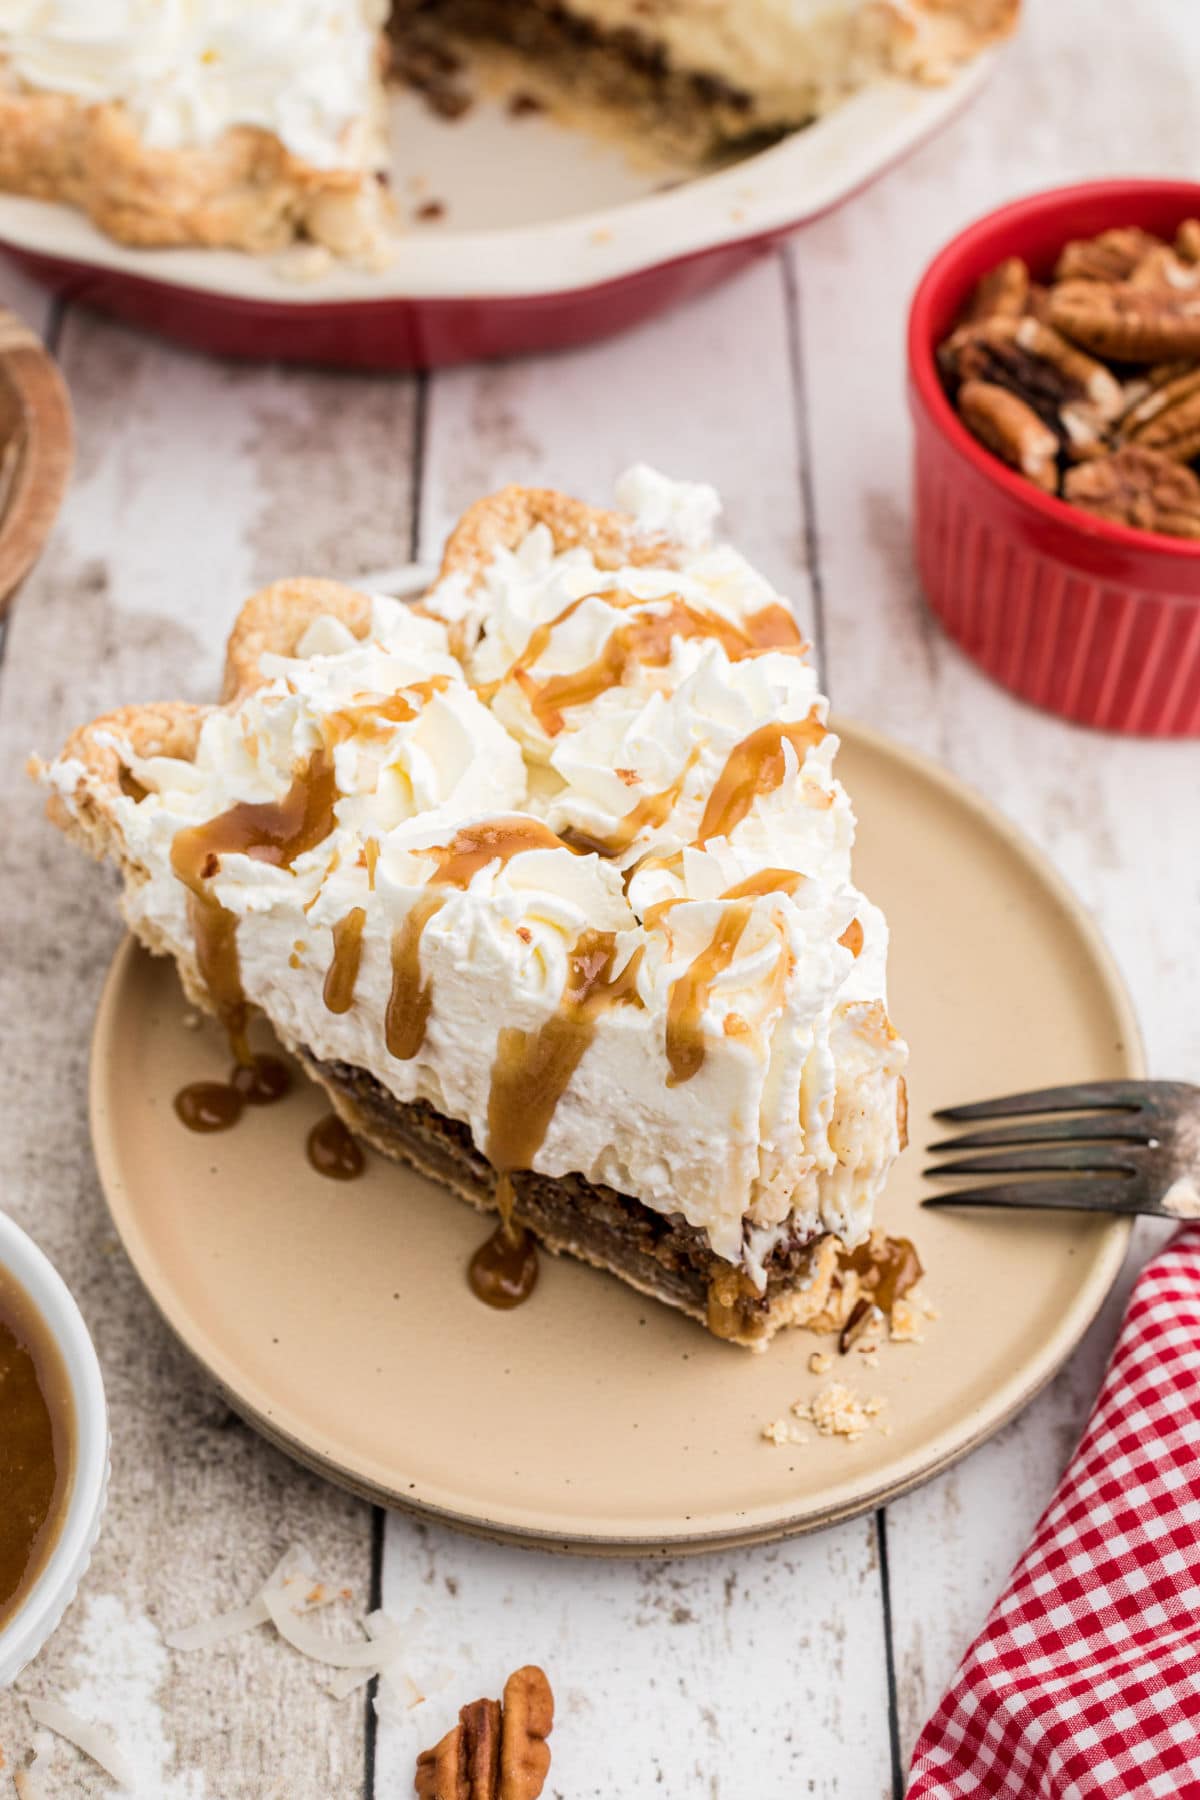 A slice of pie with whipped cream topping.